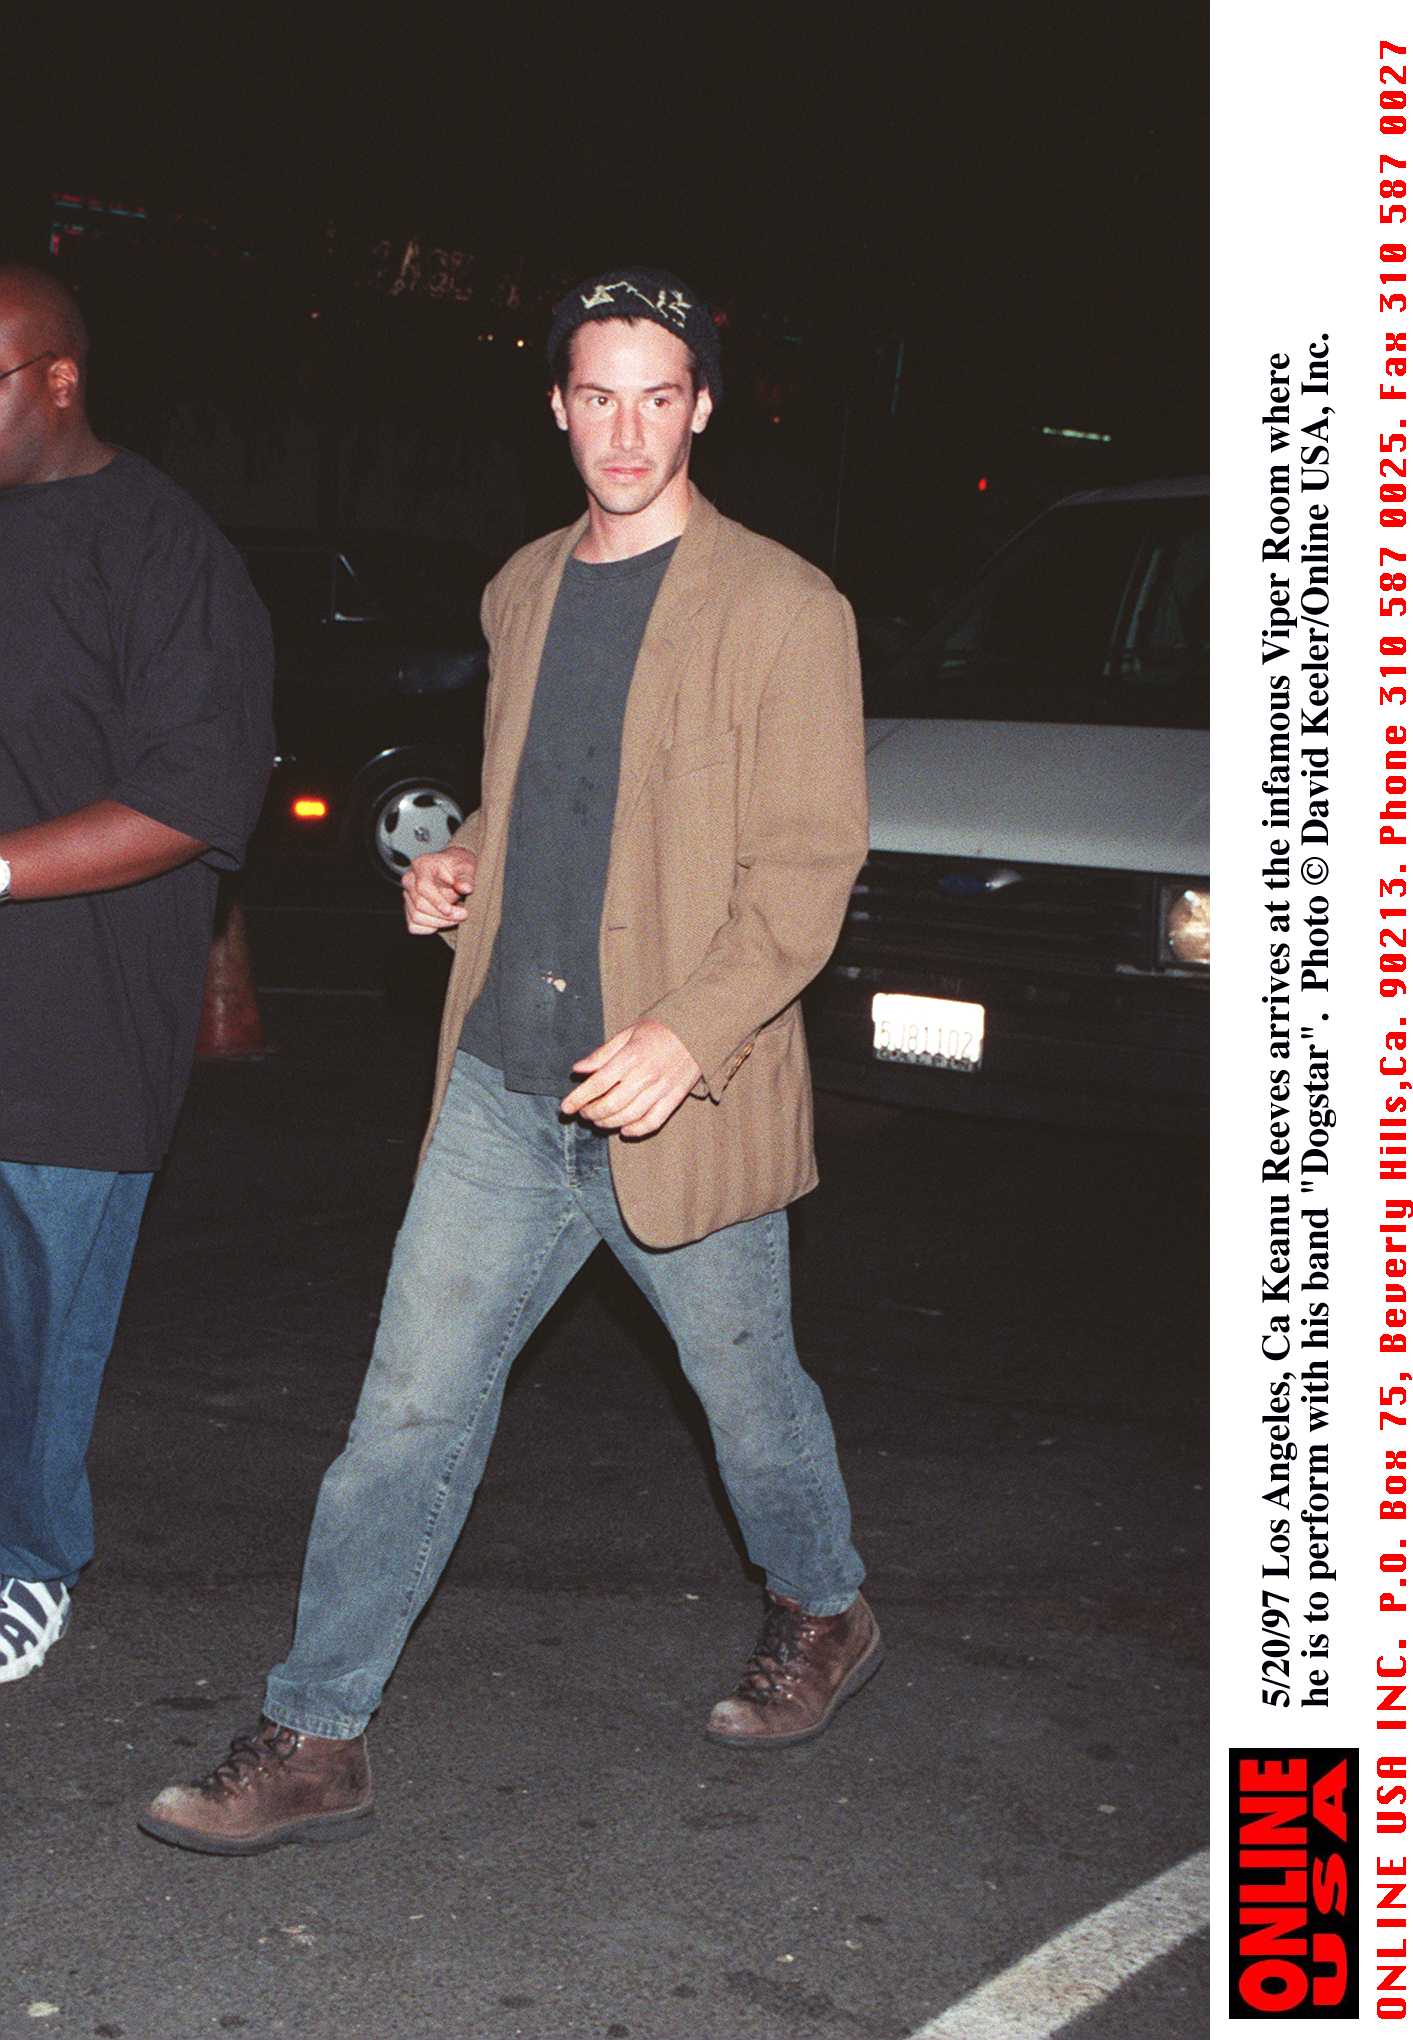 Paparazzi shot of Keanu Reeves entering the Viper Room